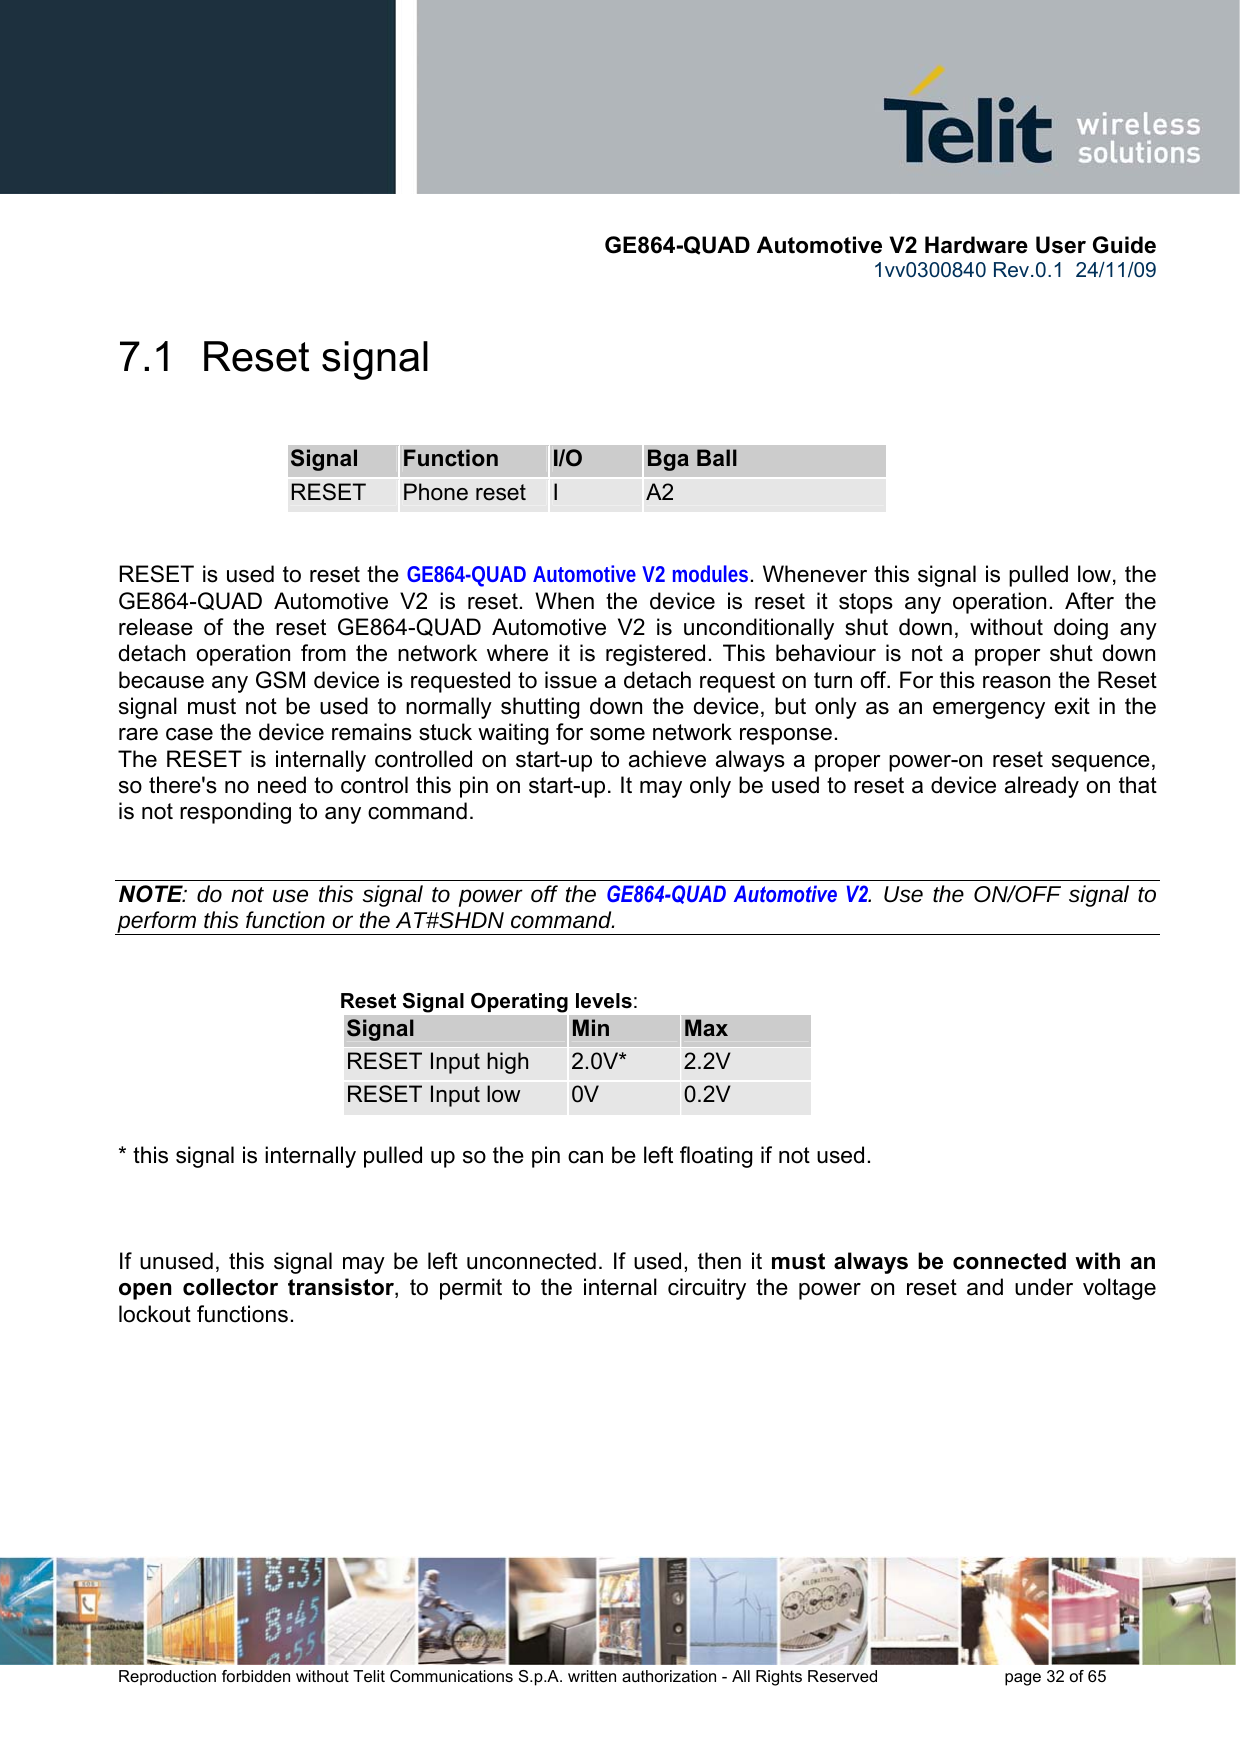       GE864-QUAD Automotive V2 Hardware User Guide 1vv0300840 Rev.0.1  24/11/09      Reproduction forbidden without Telit Communications S.p.A. written authorization - All Rights Reserved    page 32 of 65  7.1  Reset signal  Signal  Function  I/O  Bga Ball RESET  Phone reset  I  A2   RESET is used to reset the GE864-QUAD Automotive V2 modules. Whenever this signal is pulled low, the GE864-QUAD Automotive V2 is reset. When the device is reset it stops any operation. After the release of the reset GE864-QUAD Automotive V2 is unconditionally shut down, without doing any detach operation from the network where it is registered. This behaviour is not a proper shut down because any GSM device is requested to issue a detach request on turn off. For this reason the Reset signal must not be used to normally shutting down the device, but only as an emergency exit in the rare case the device remains stuck waiting for some network response. The RESET is internally controlled on start-up to achieve always a proper power-on reset sequence, so there&apos;s no need to control this pin on start-up. It may only be used to reset a device already on that is not responding to any command.   NOTE: do not use this signal to power off the GE864-QUAD Automotive V2. Use the ON/OFF signal to perform this function or the AT#SHDN command.   Reset Signal Operating levels: Signal  Min  Max RESET Input high  2.0V*  2.2V RESET Input low  0V  0.2V  * this signal is internally pulled up so the pin can be left floating if not used.    If unused, this signal may be left unconnected. If used, then it must always be connected with an open collector transistor, to permit to the internal circuitry the power on reset and under voltage lockout functions.        